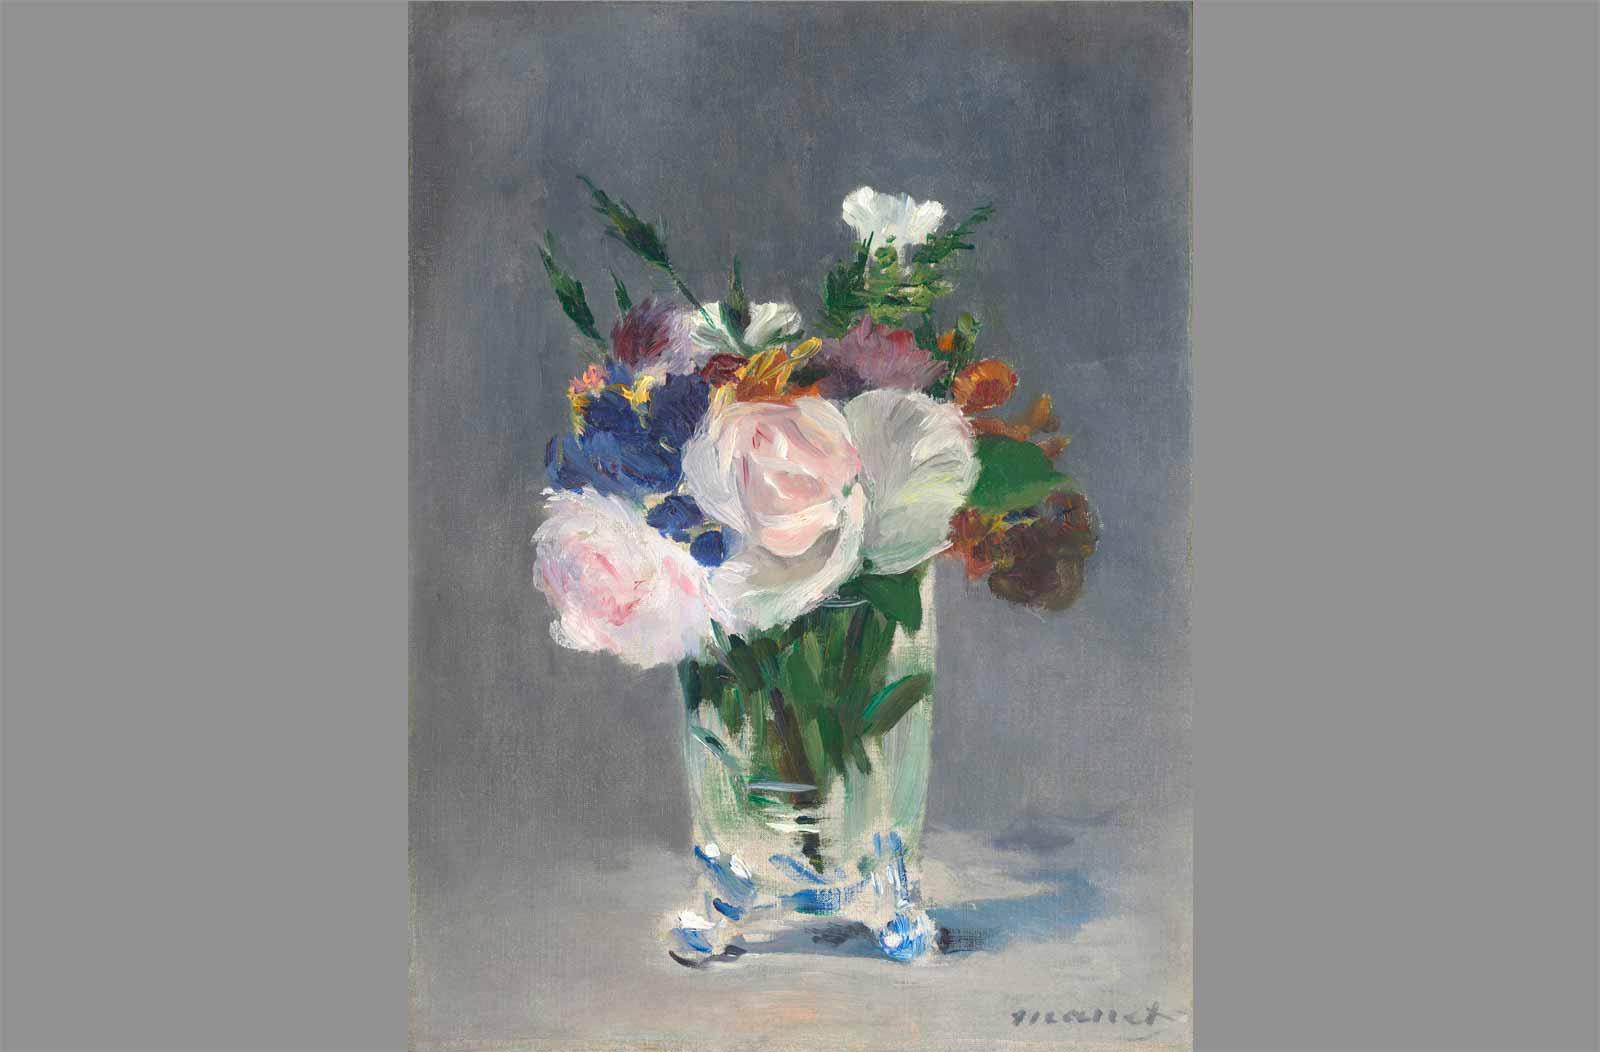 Édouard Manet. Flowers in a Crystal Vase, about 1882. 